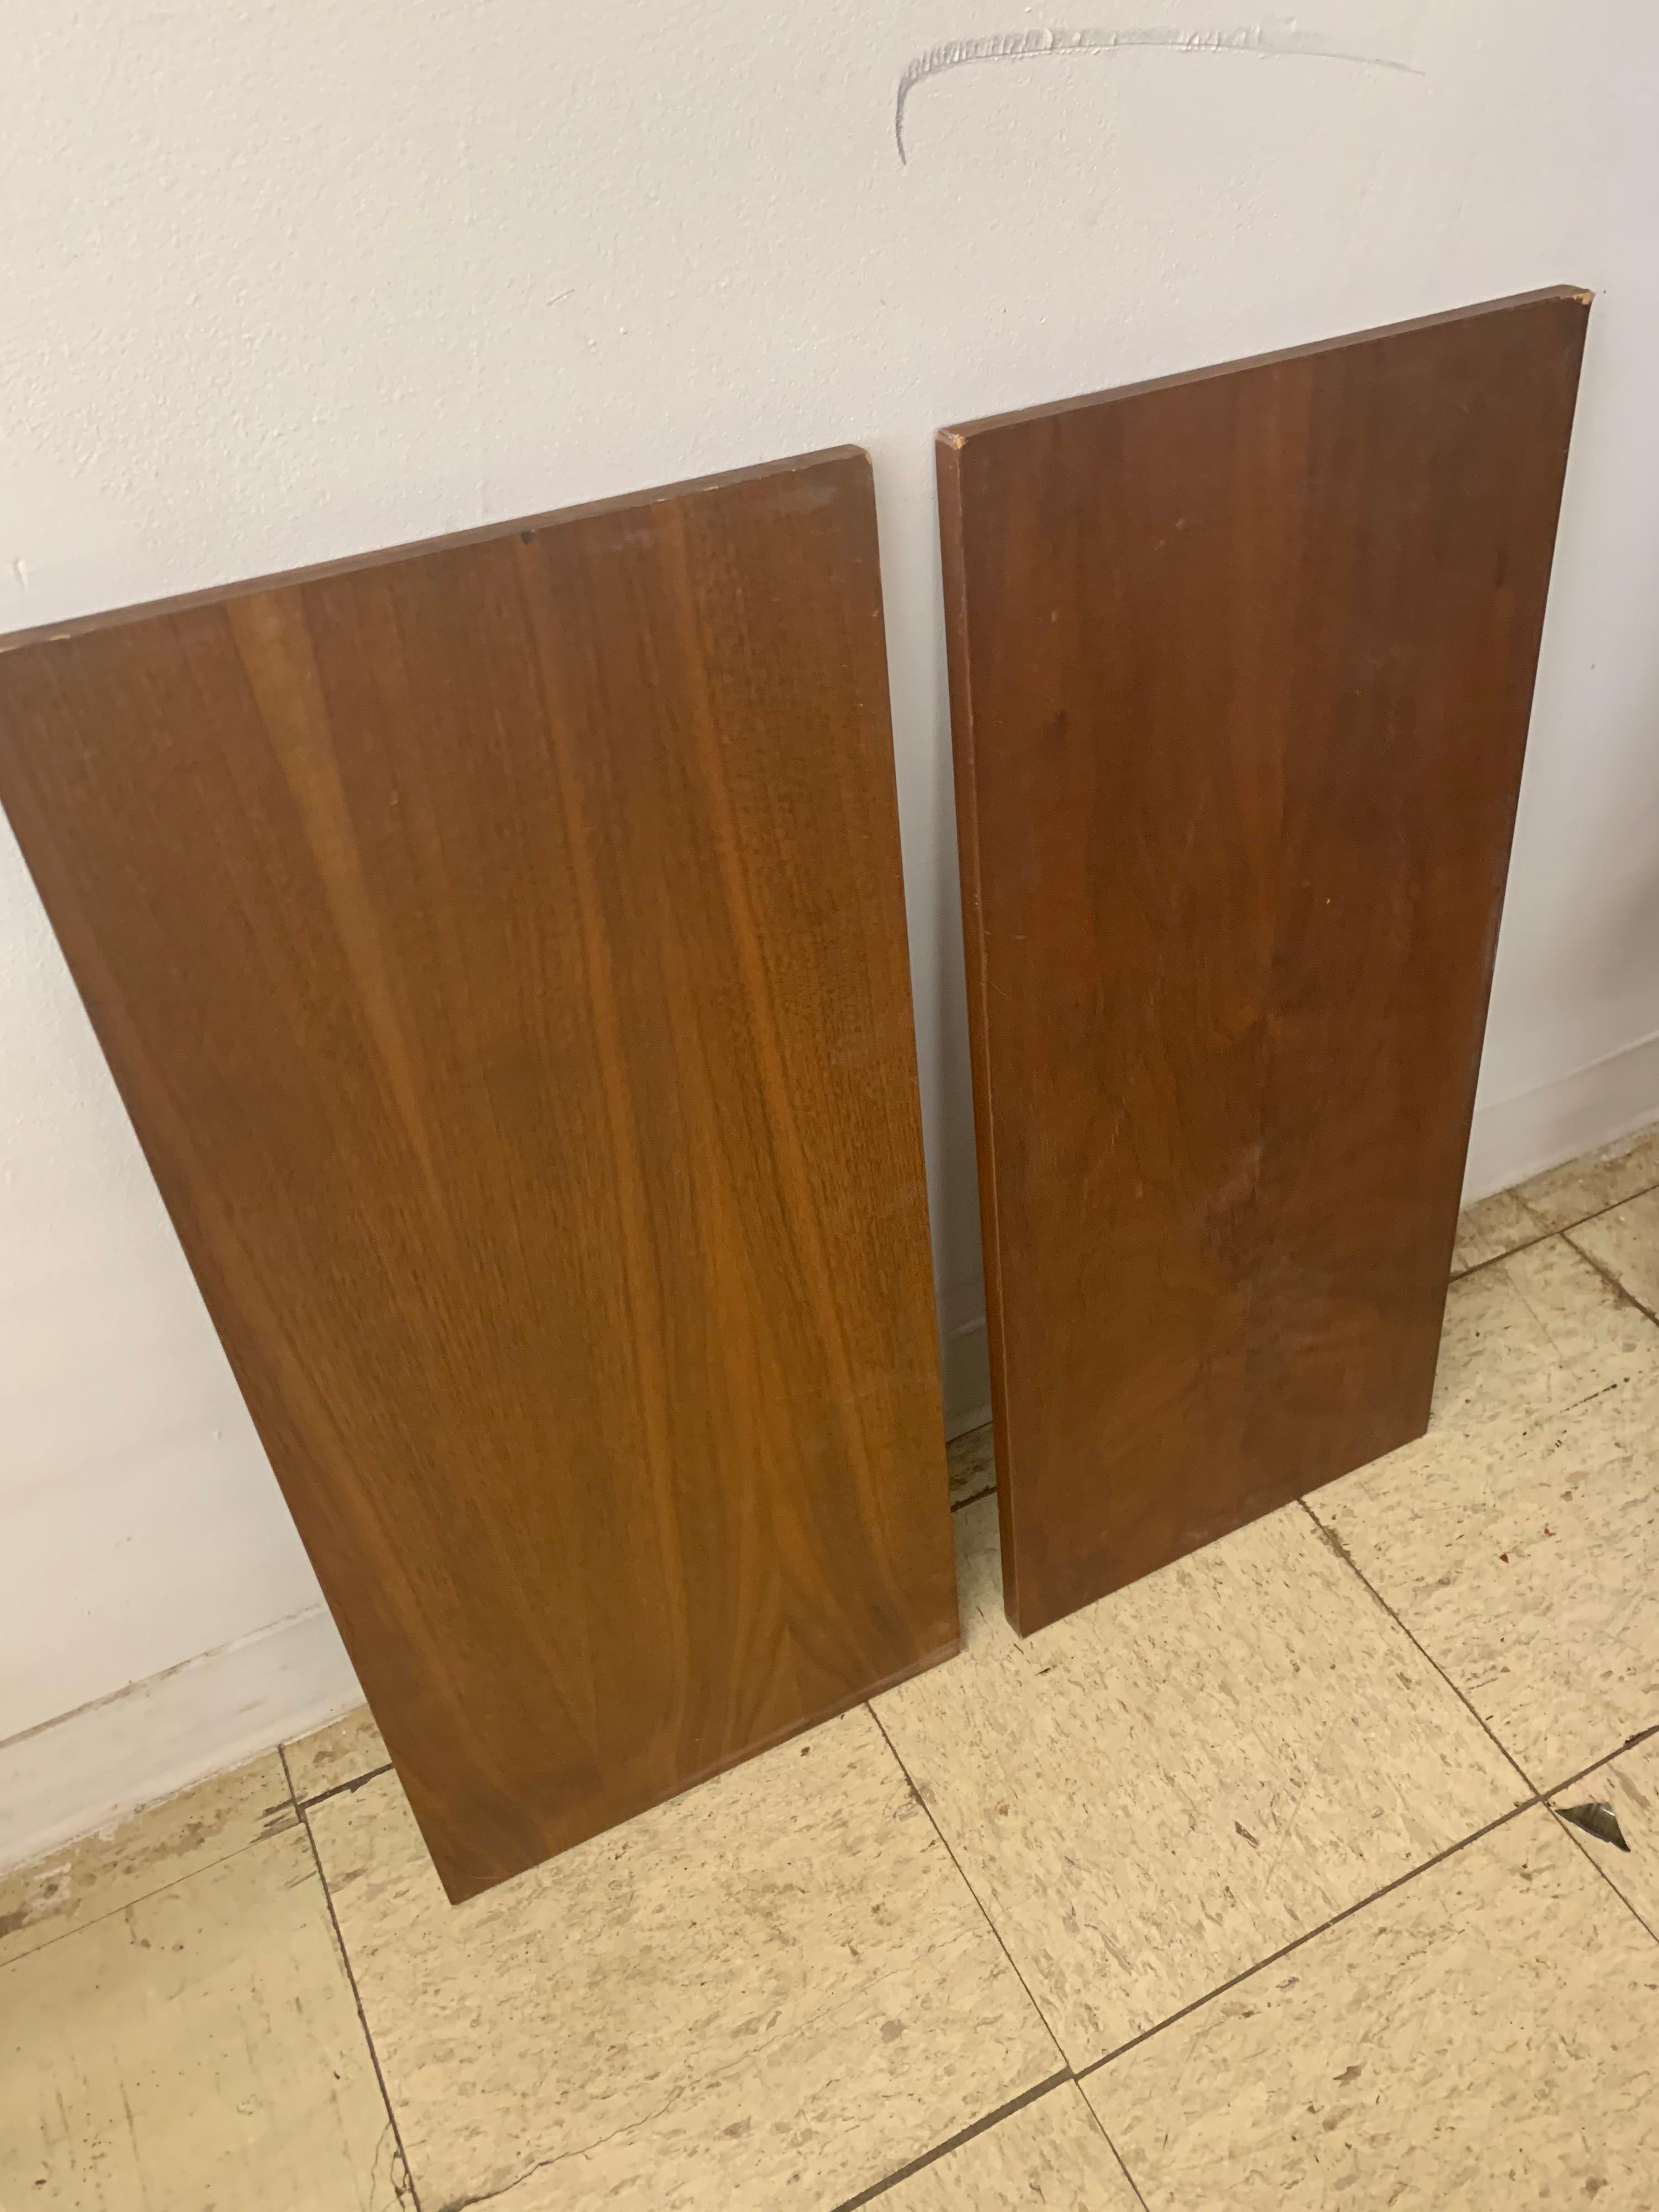 Danish Modern Midcentury Modular Three Bay Bookcase Wall Unit and Desk In Good Condition For Sale In West Hartford, CT